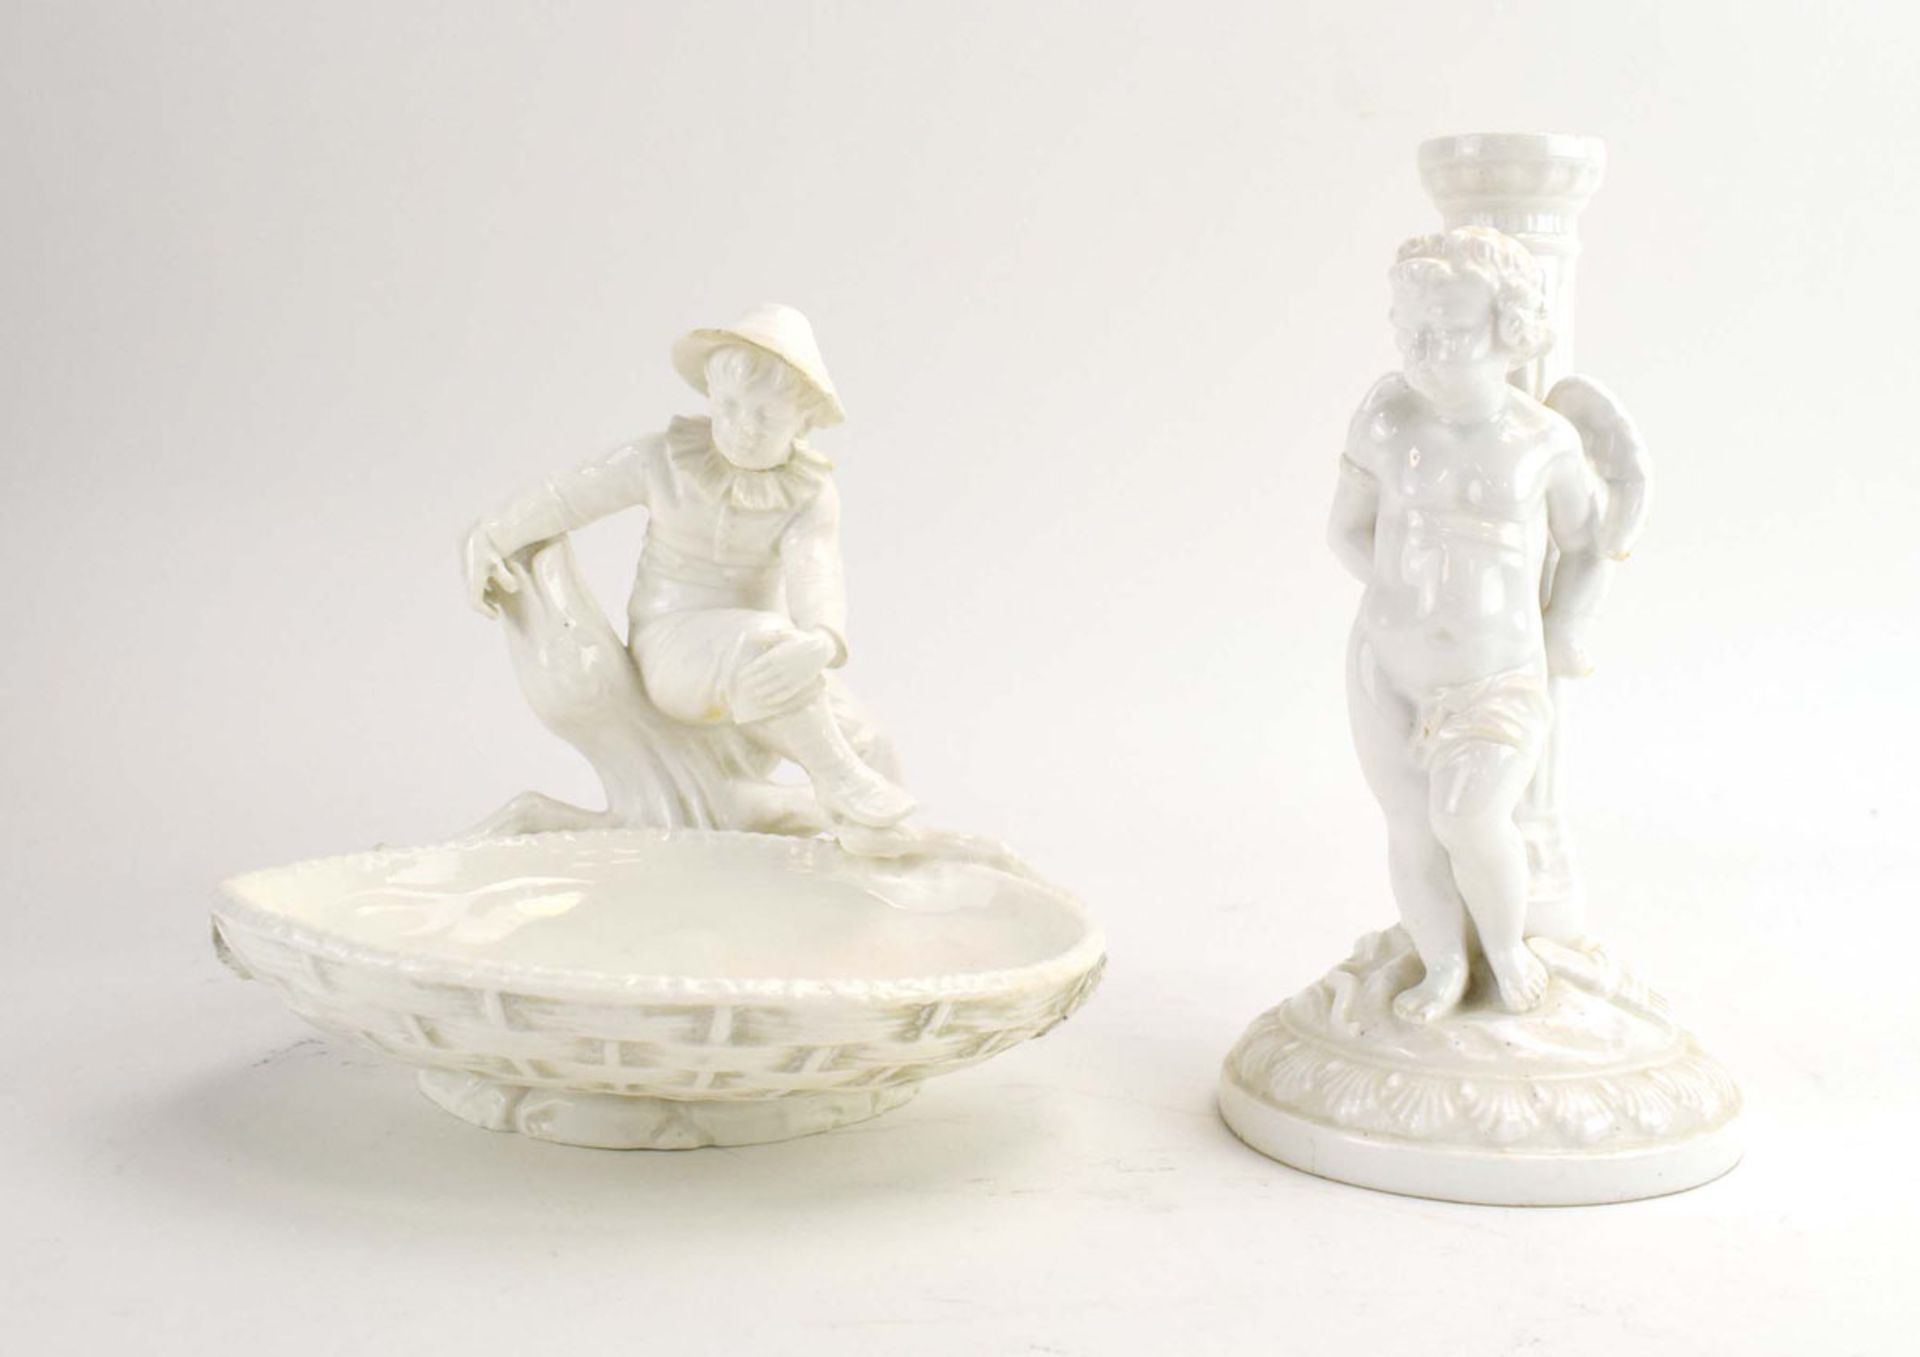 RR370 - A Royal Worcester blanc de chine dish modelled as a young boy sitting on a trunk, h. 15.5 cm - Image 2 of 7